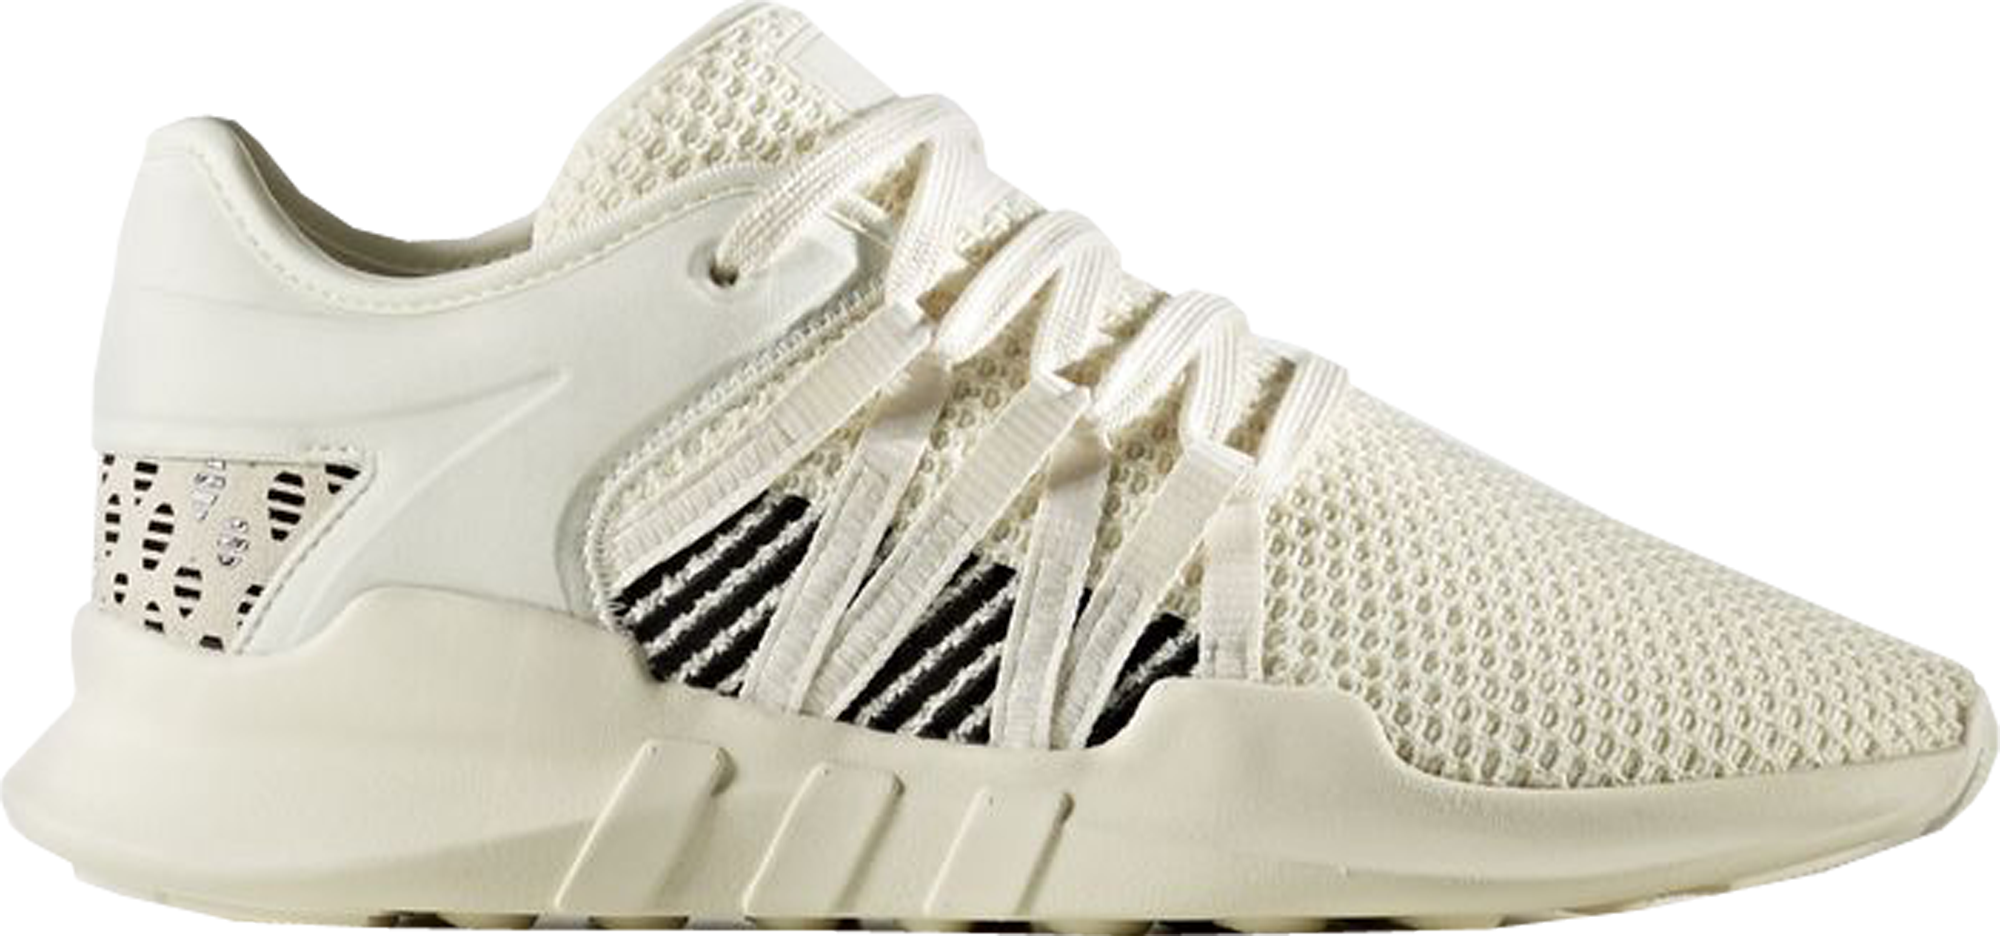 adidas originals eqt racing adv sneakers in off white hld